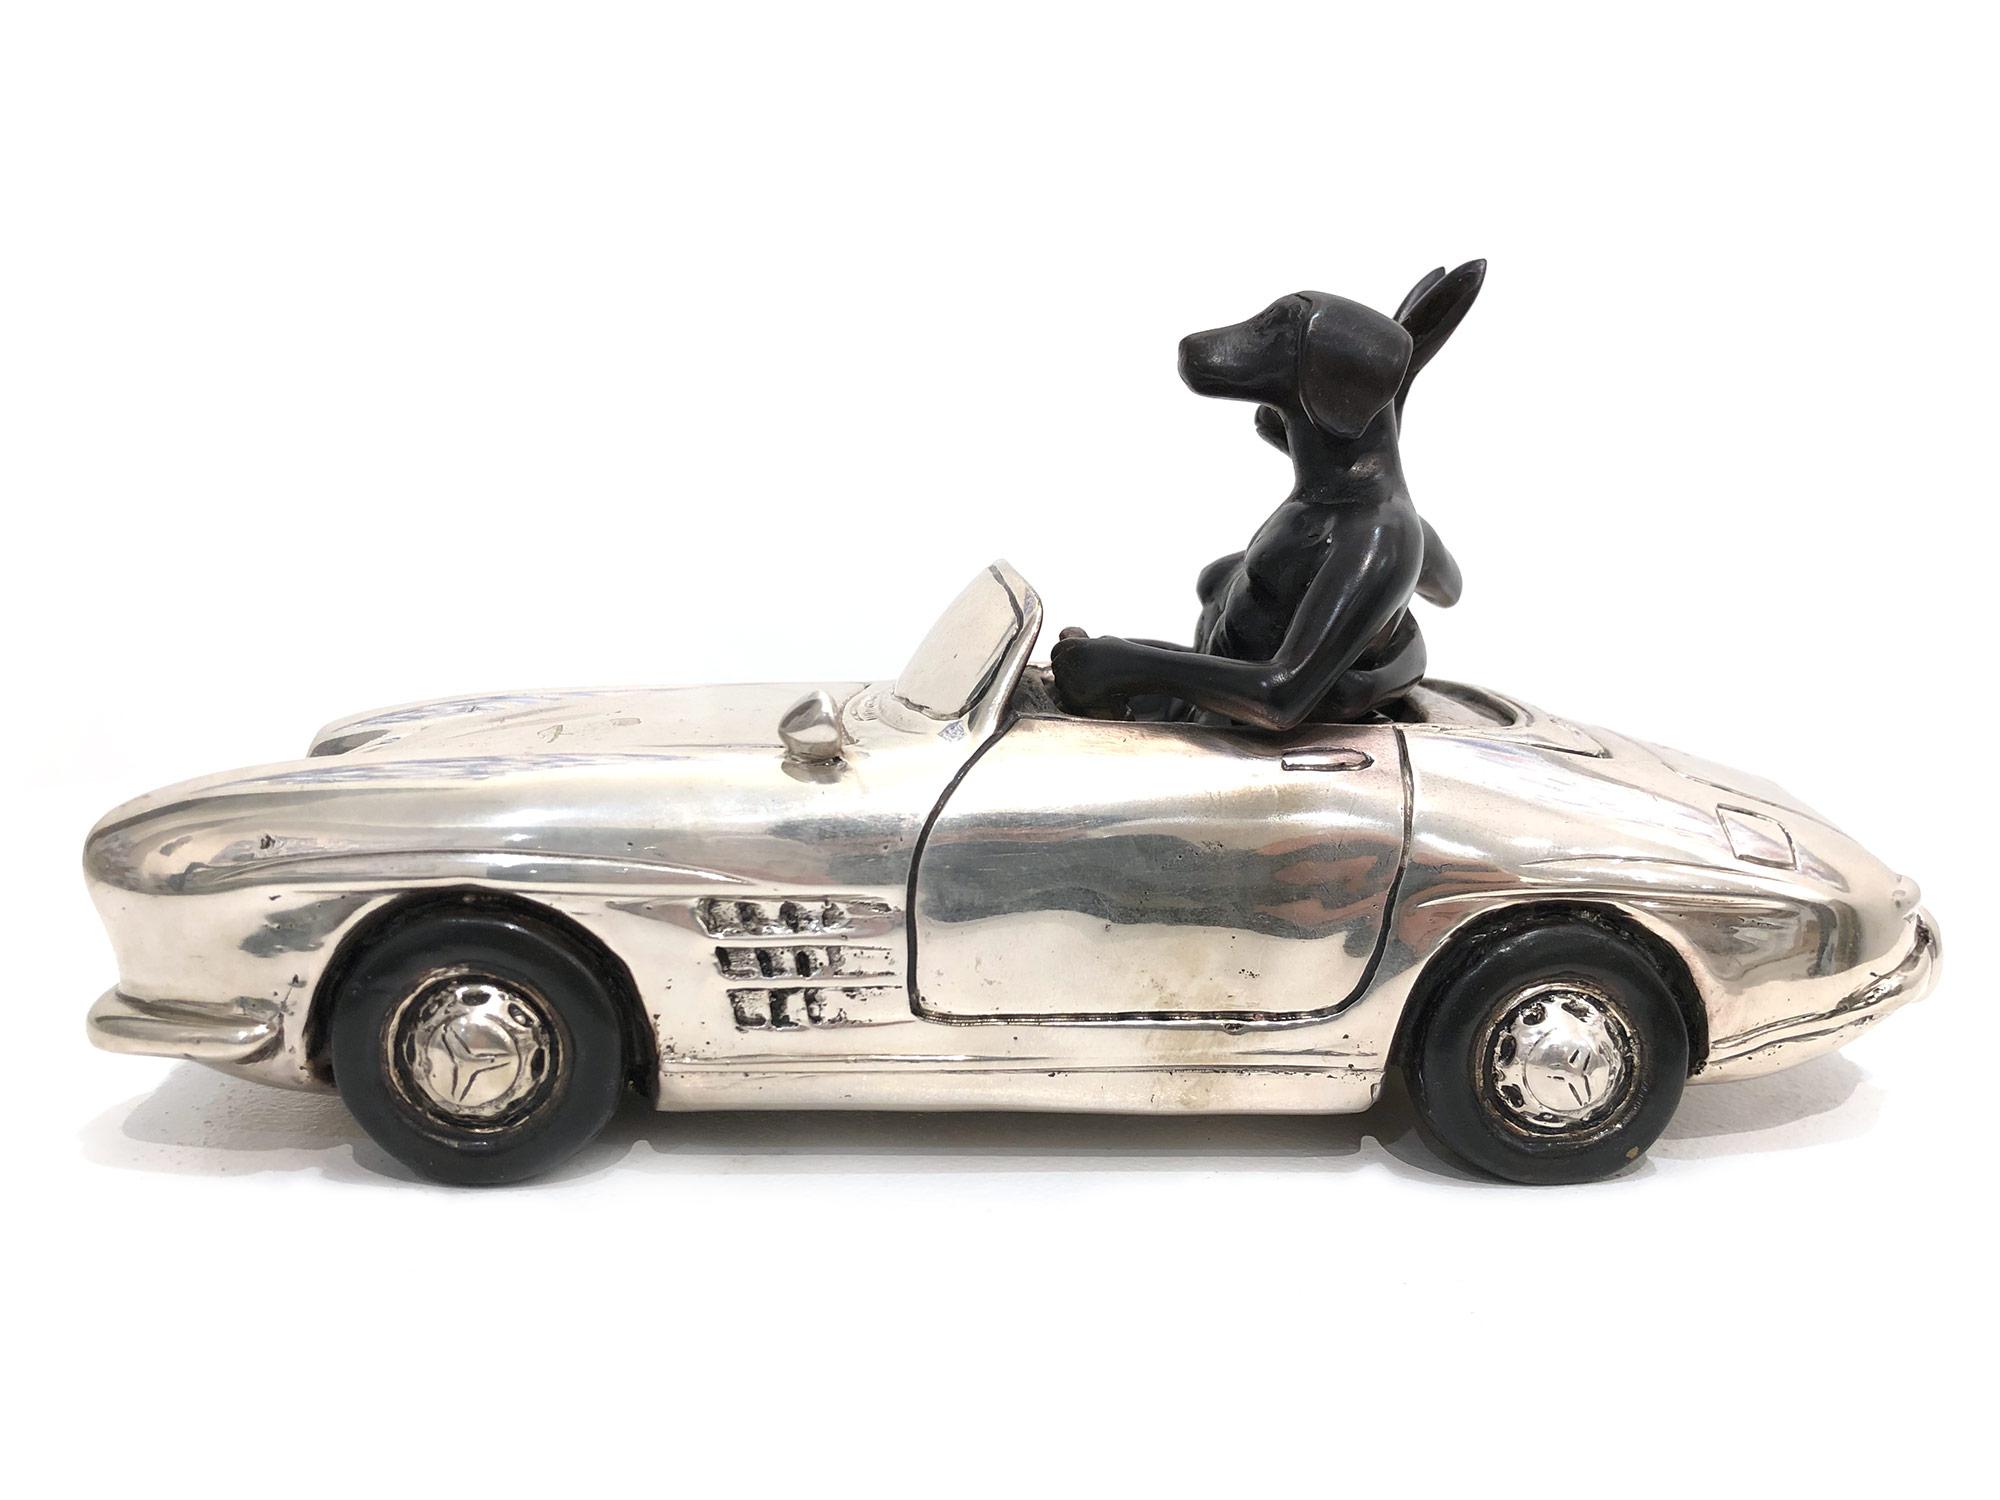 They Love Breaking the Speed Limit - Pop Art Sculpture by Gillie and Marc Schattner